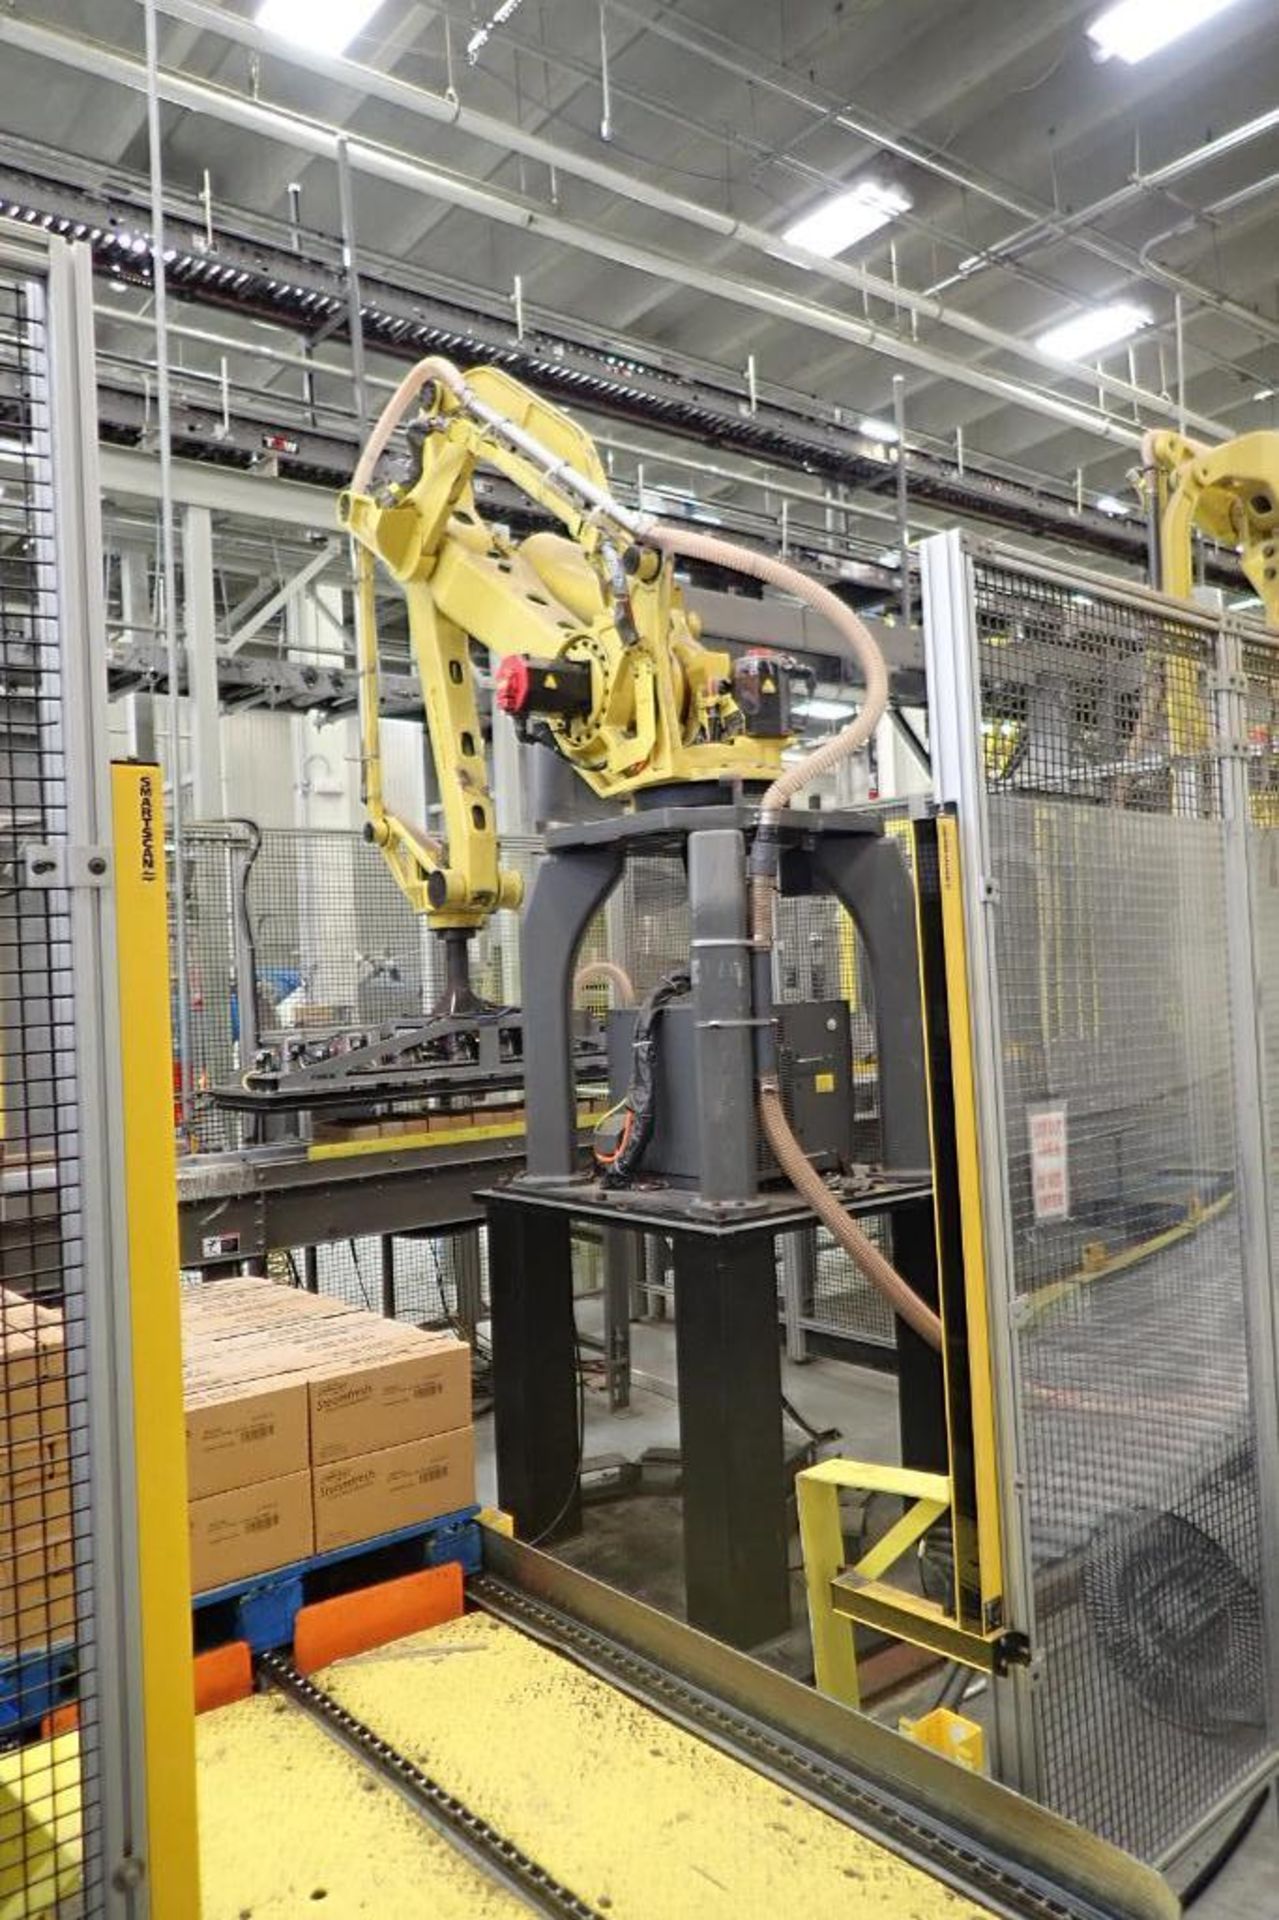 Fanuc palletizing robot model M-410-iB16 with controller and pendant - Image 2 of 12